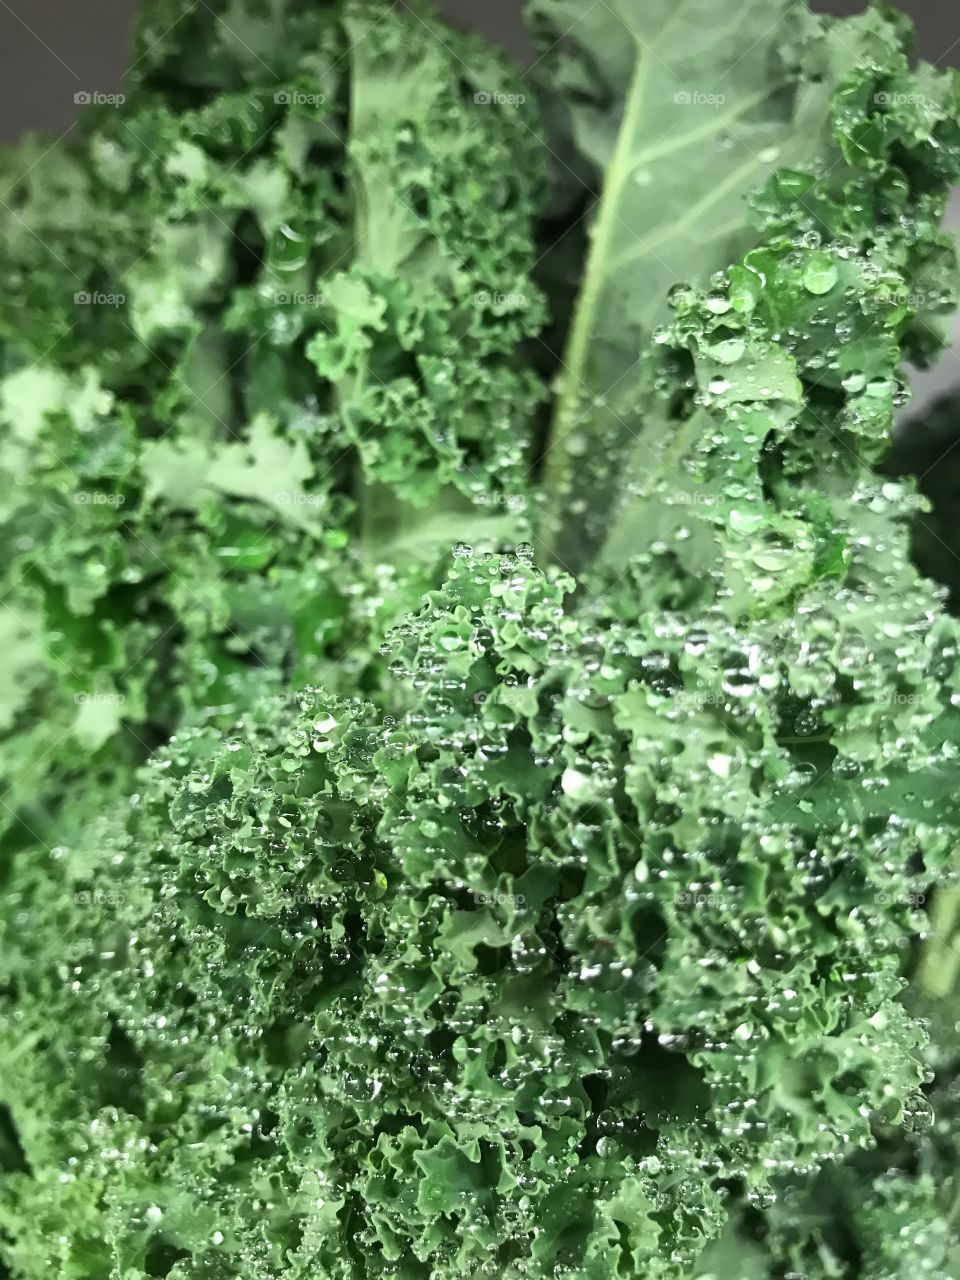 Water Droplets on Fresh Produce